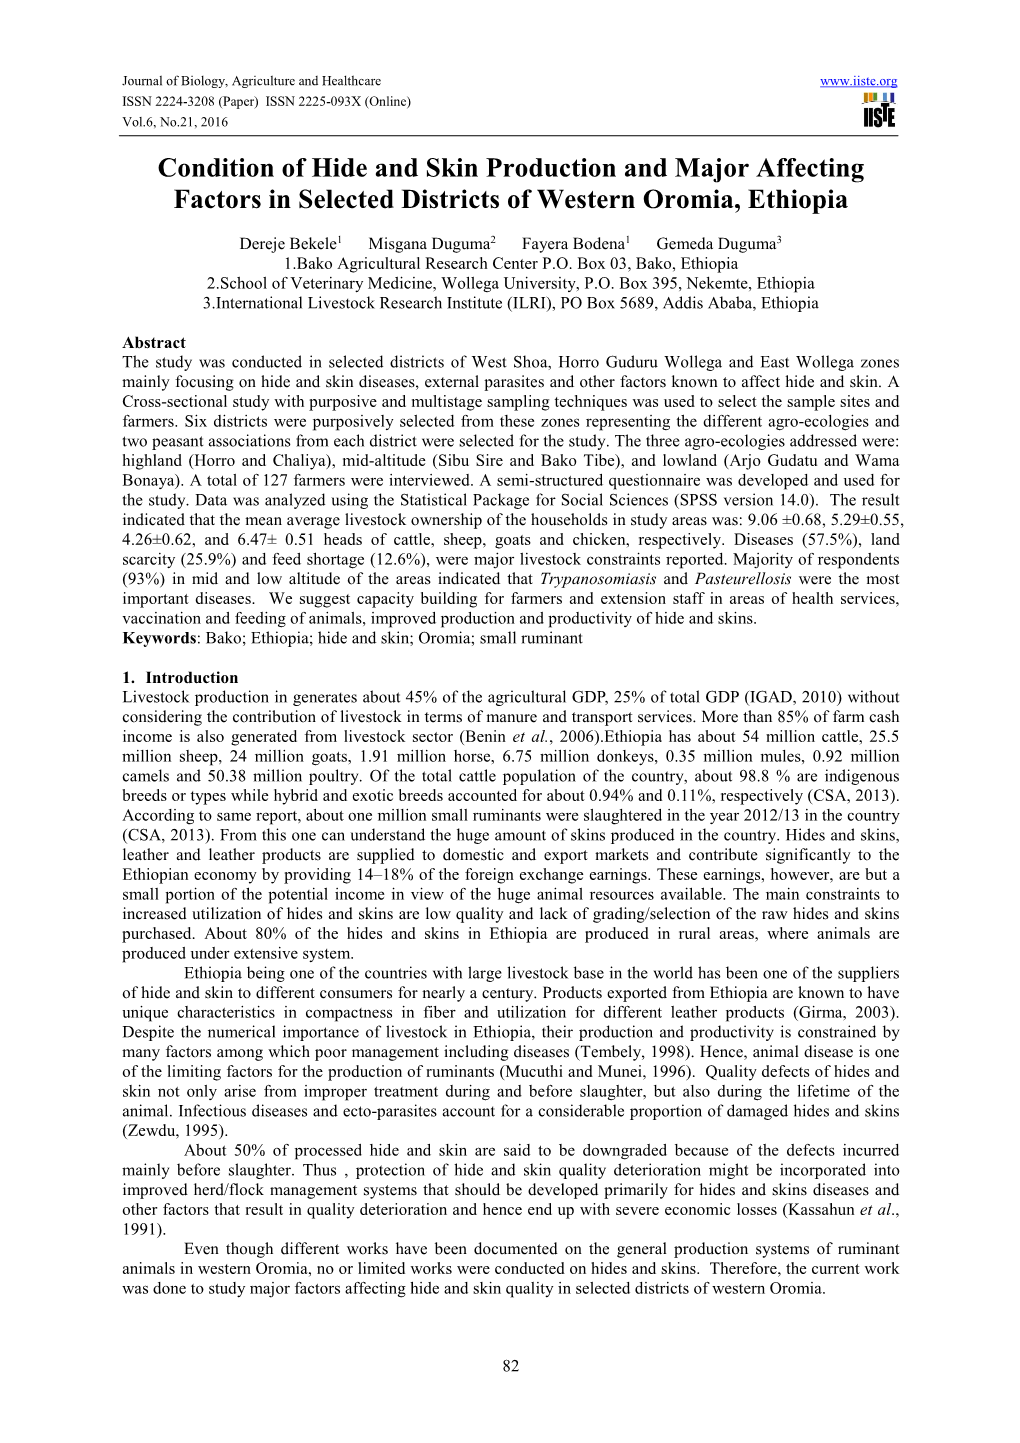 Condition of Hide and Skin Production and Major Affecting Factors in Selected Districts of Western Oromia, Ethiopia